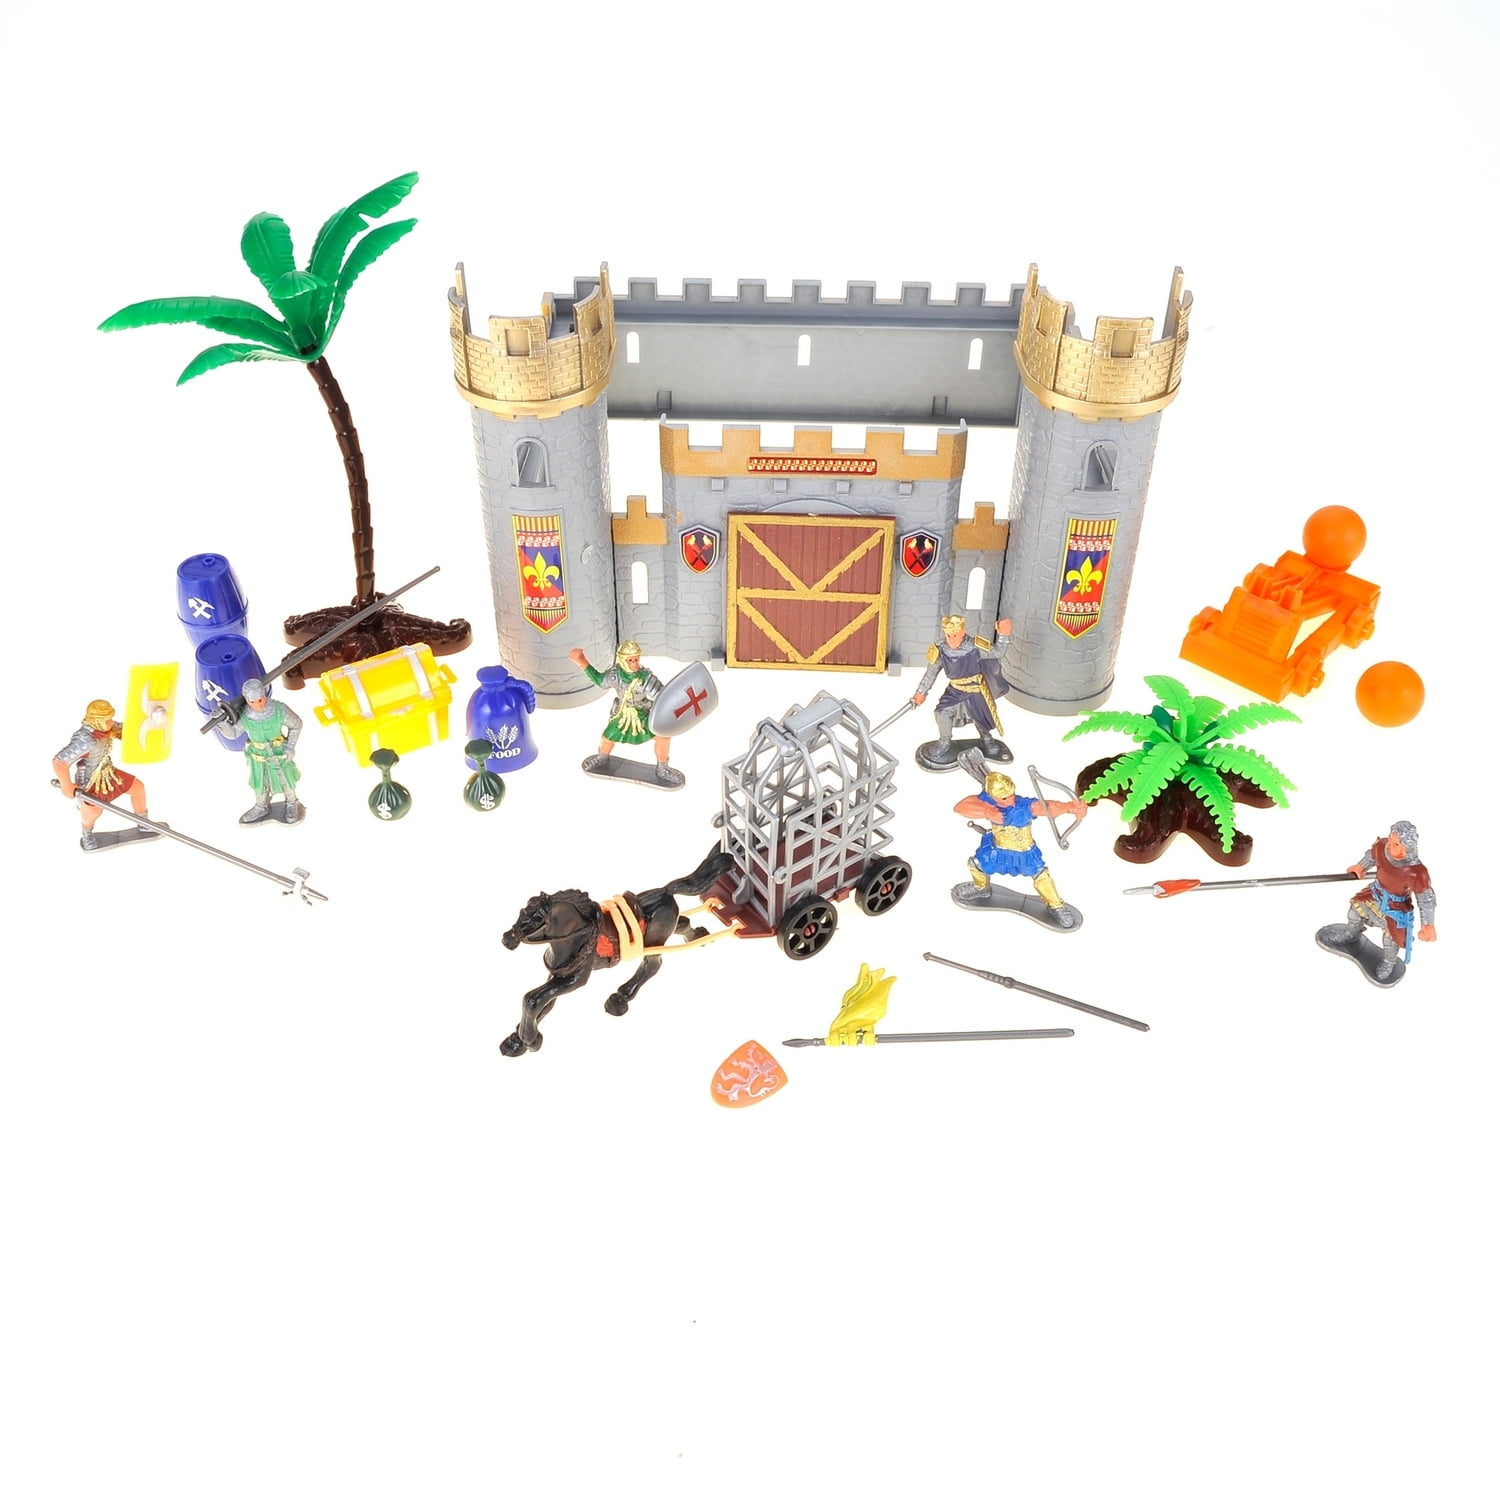 Castle Knights Catapult Medieval Toy Soldiers Figures & Accessories Box Set 